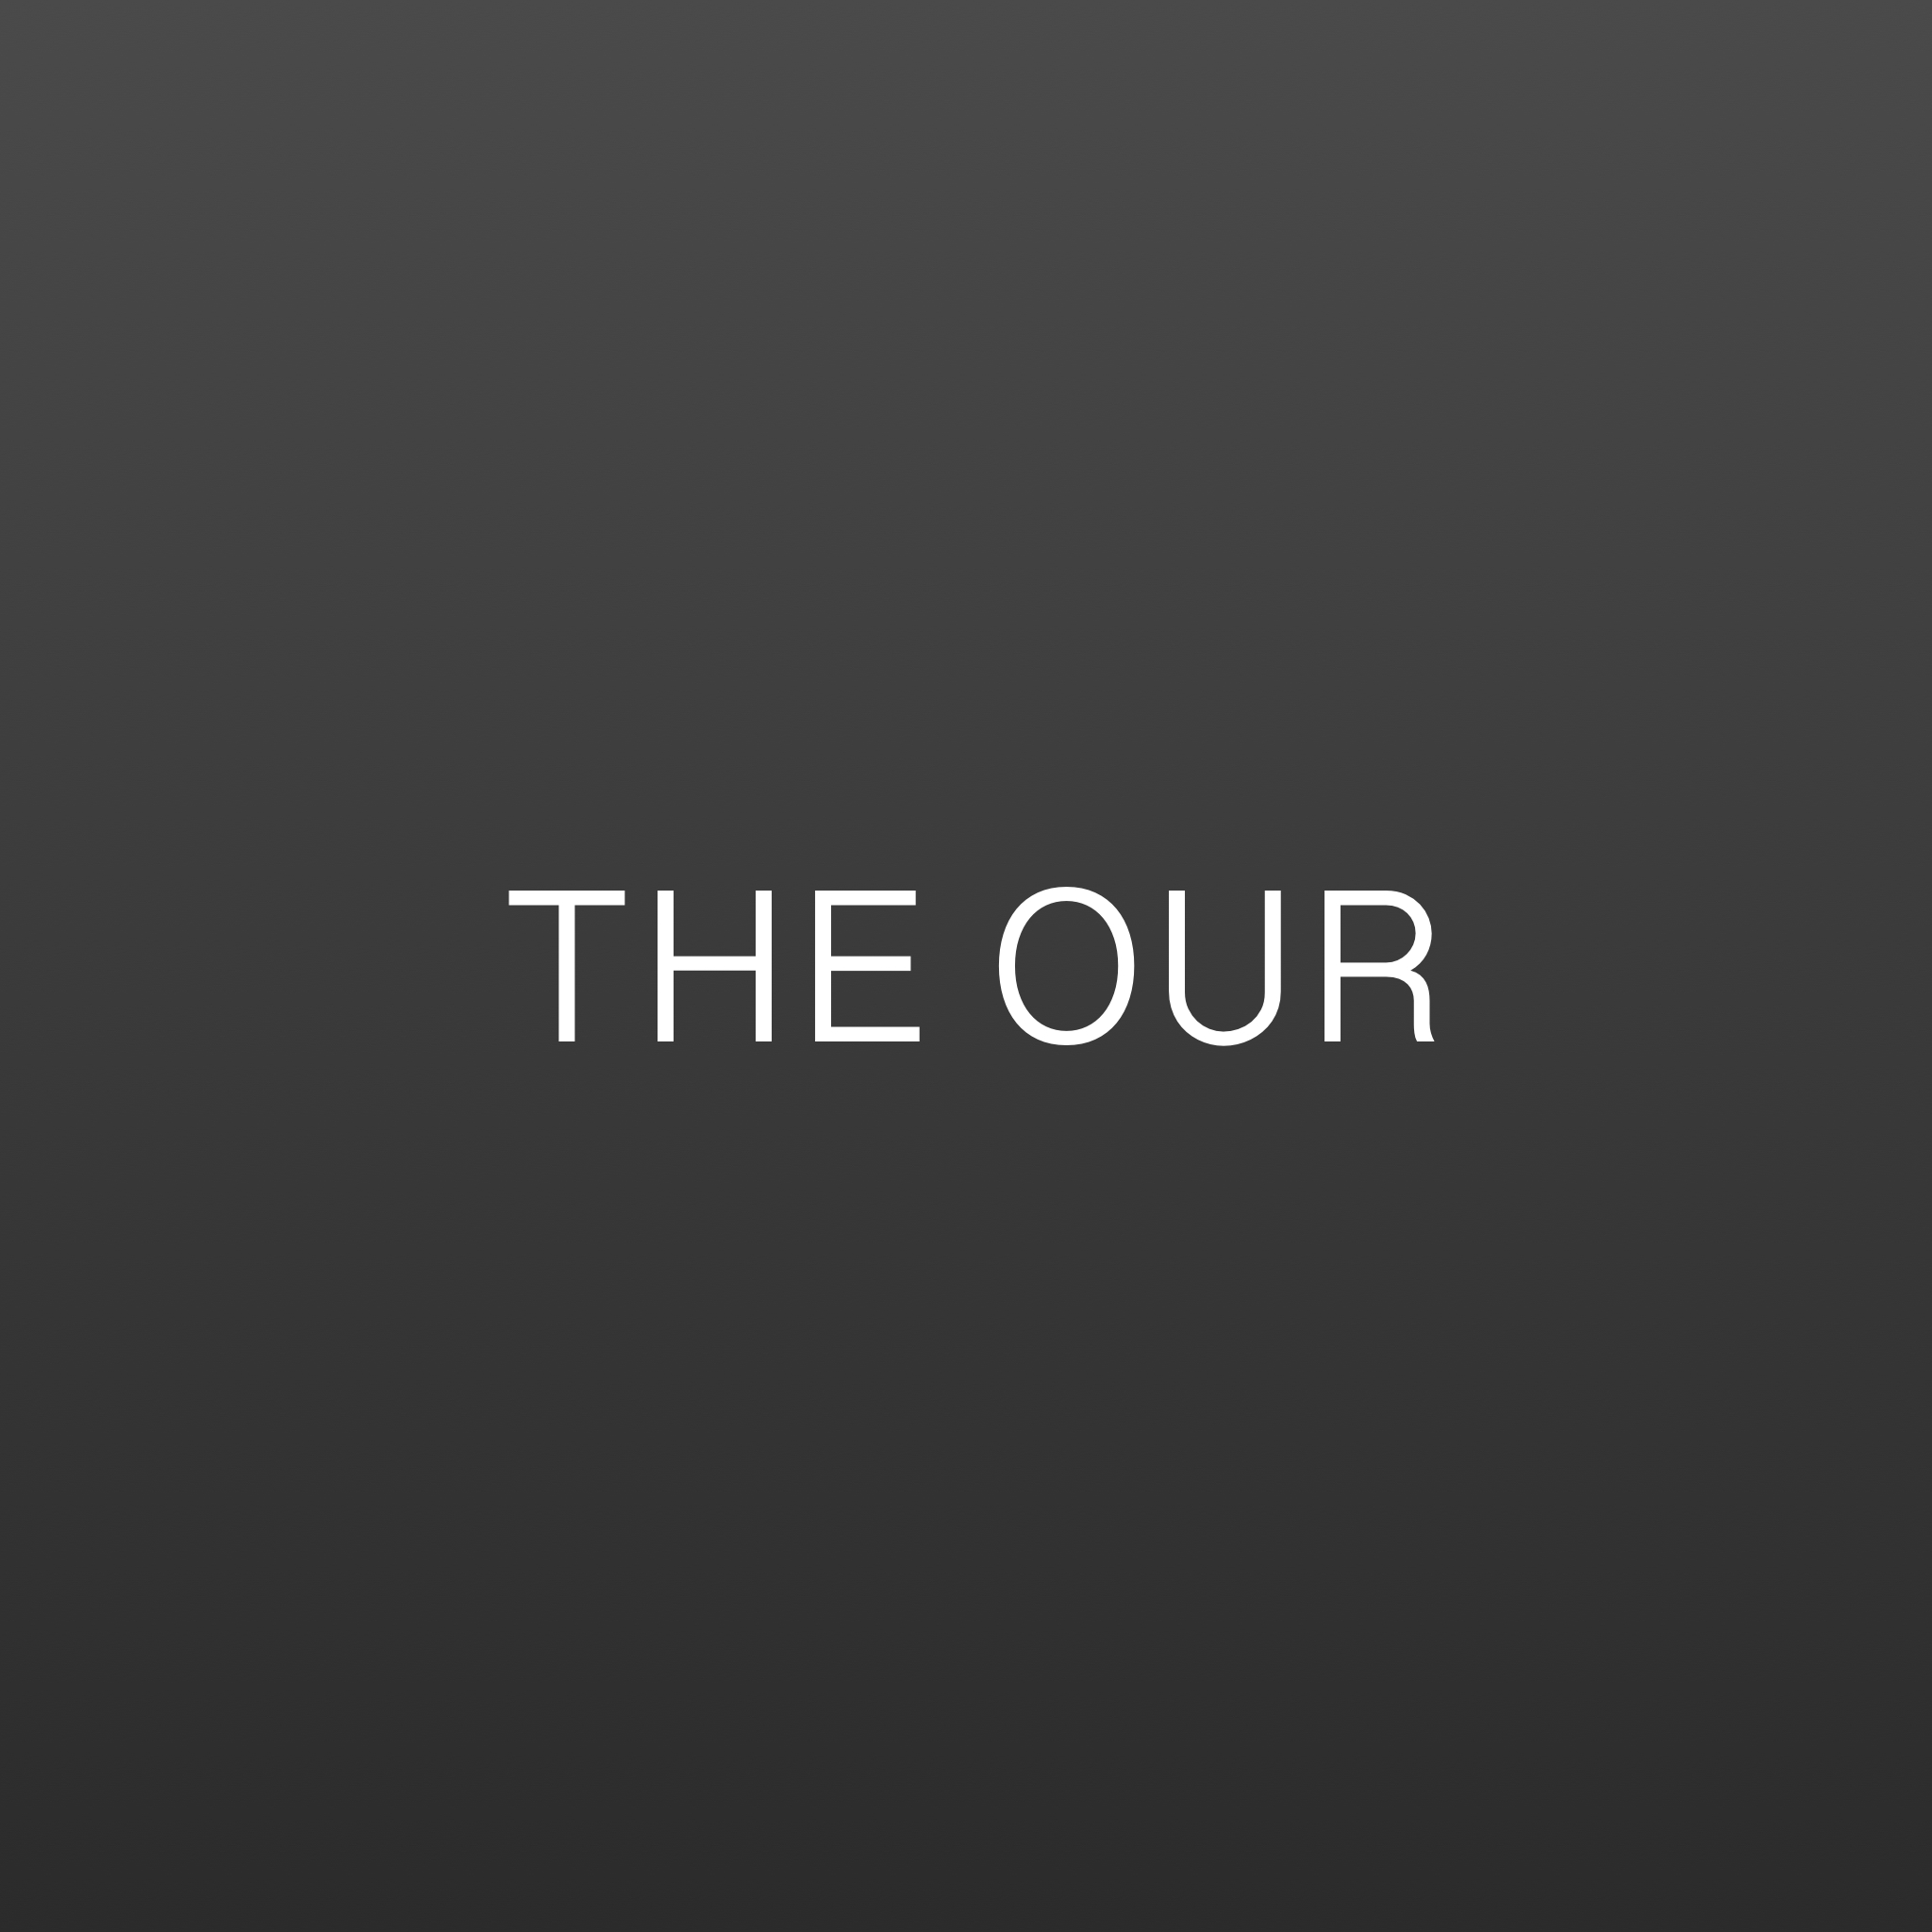 THE OUR